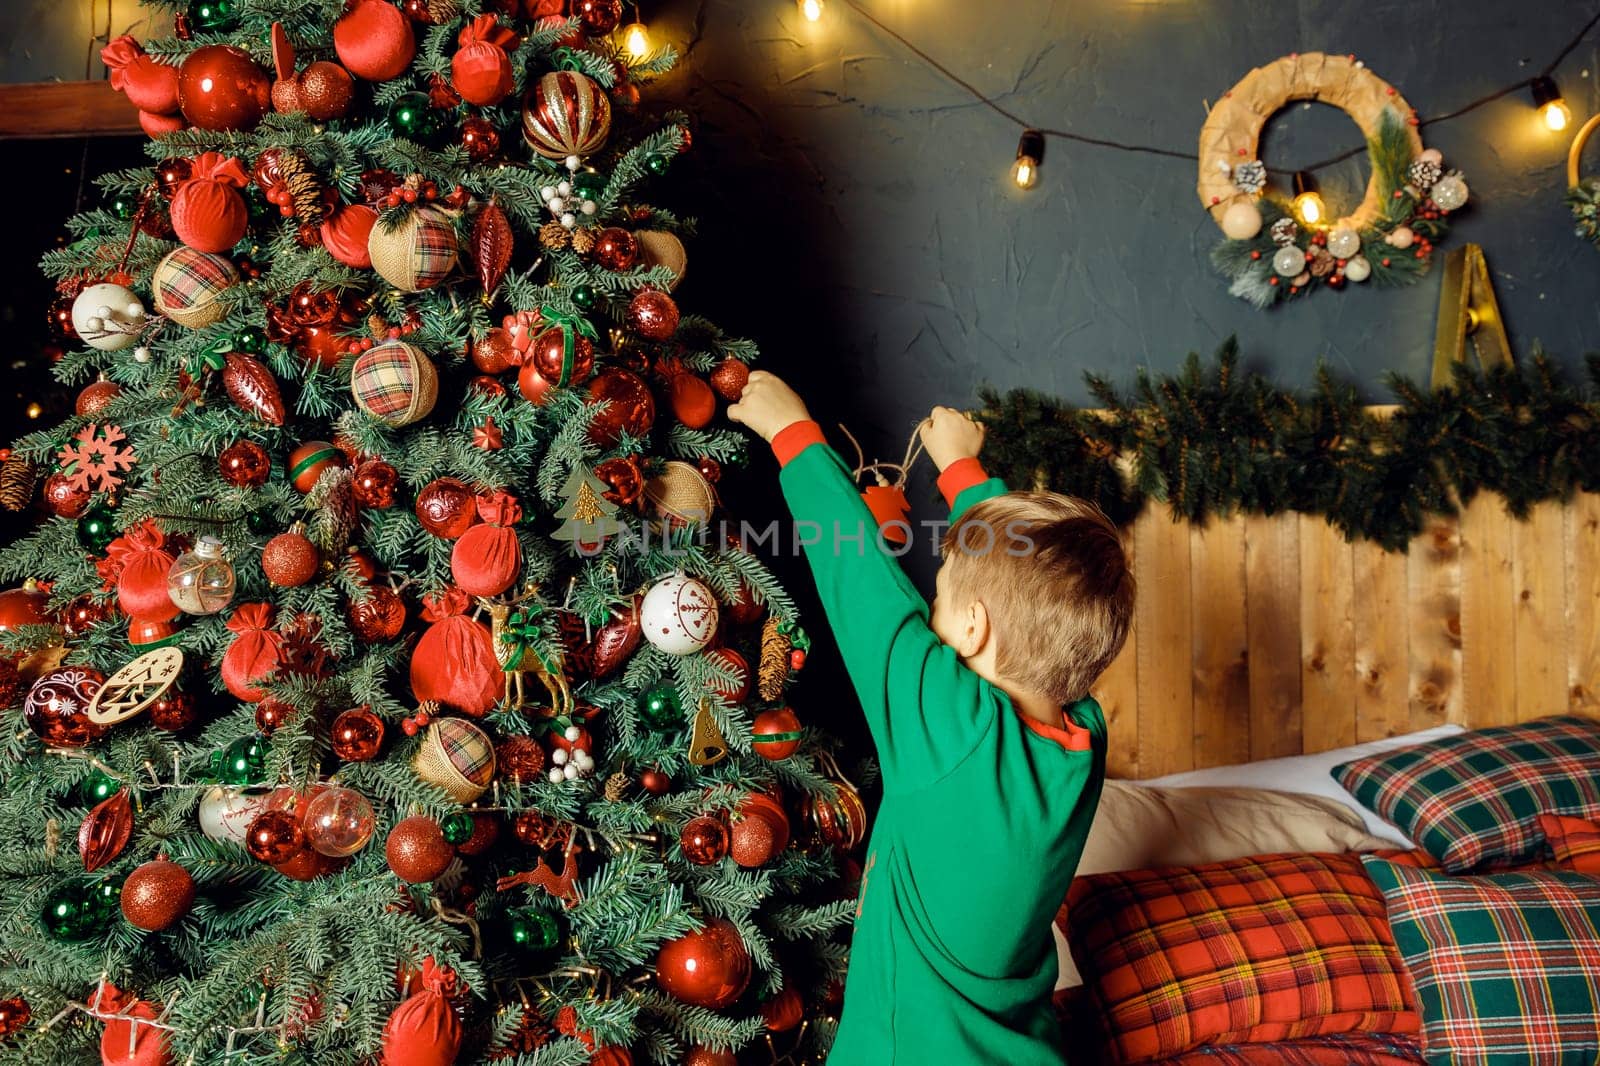 unrecognizable Child hanging a ball on illuminated Christmas tree.glowing lights. Boy in green pajamas decorating Christmas tree.Christmas good mood. Lifestyle, family and holiday. by YuliaYaspe1979